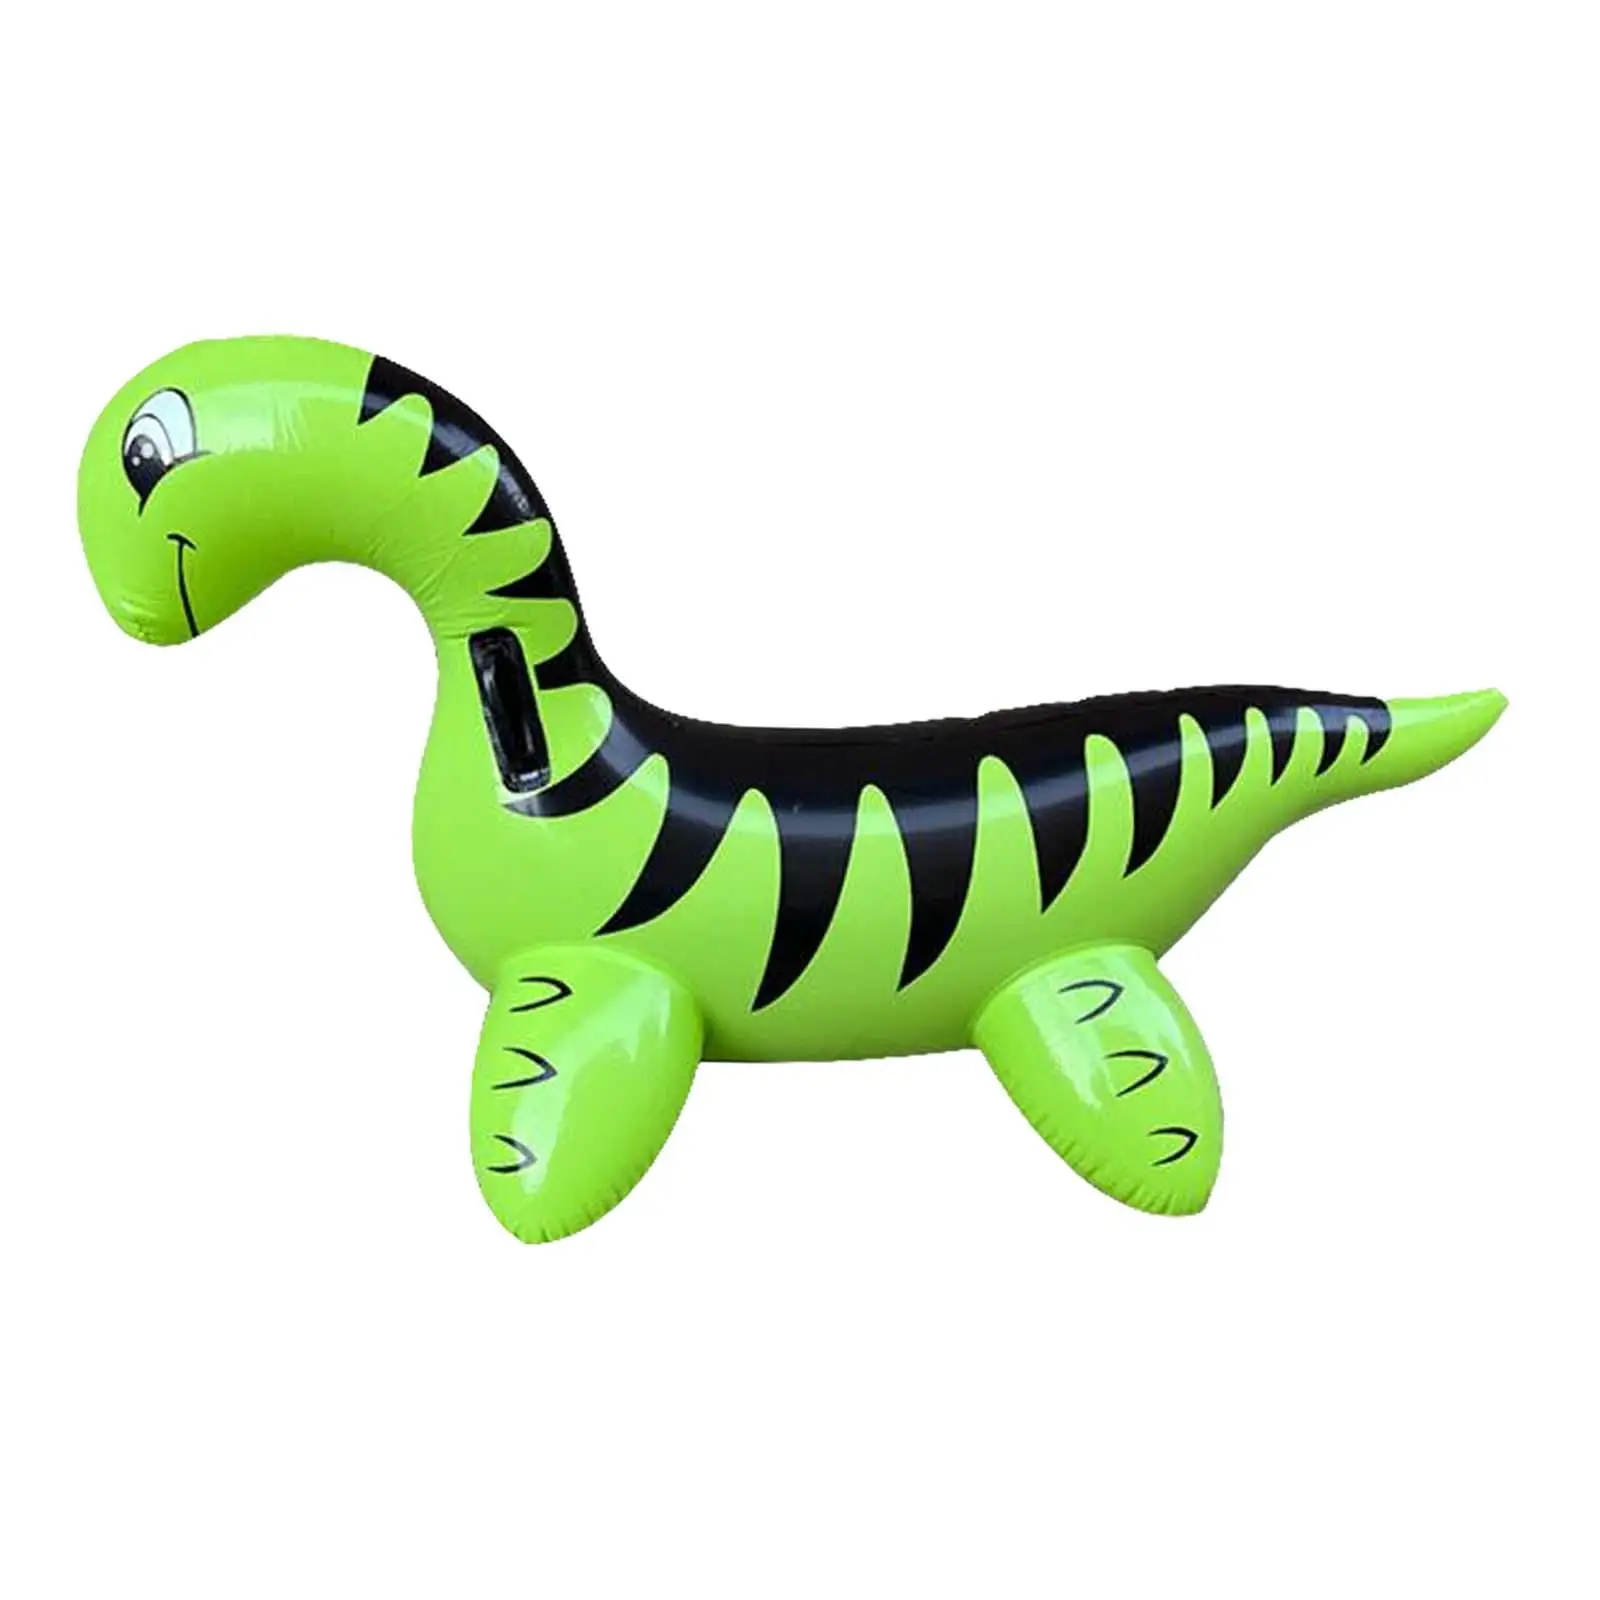 Dinosaur Pool Floats Inflatable Pool Toys for Swimming Party Supplies Beach